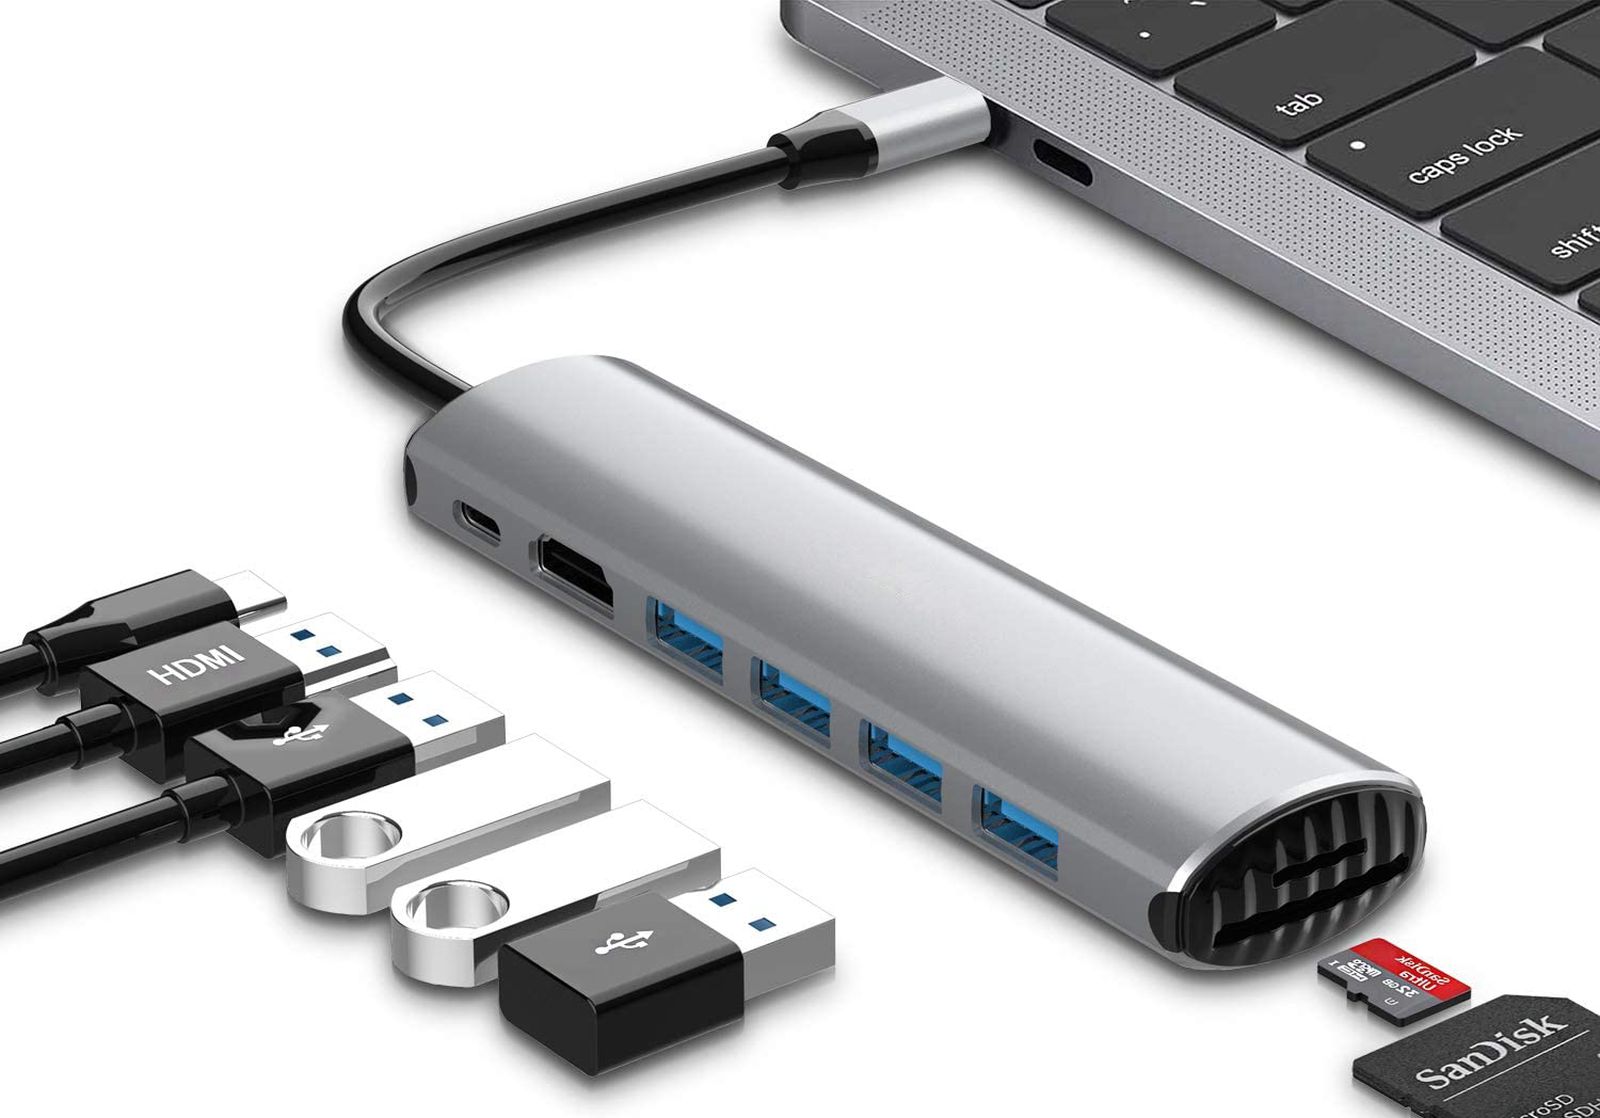 macOS Monterey Users Report Connectivity Issues With USB Hubs